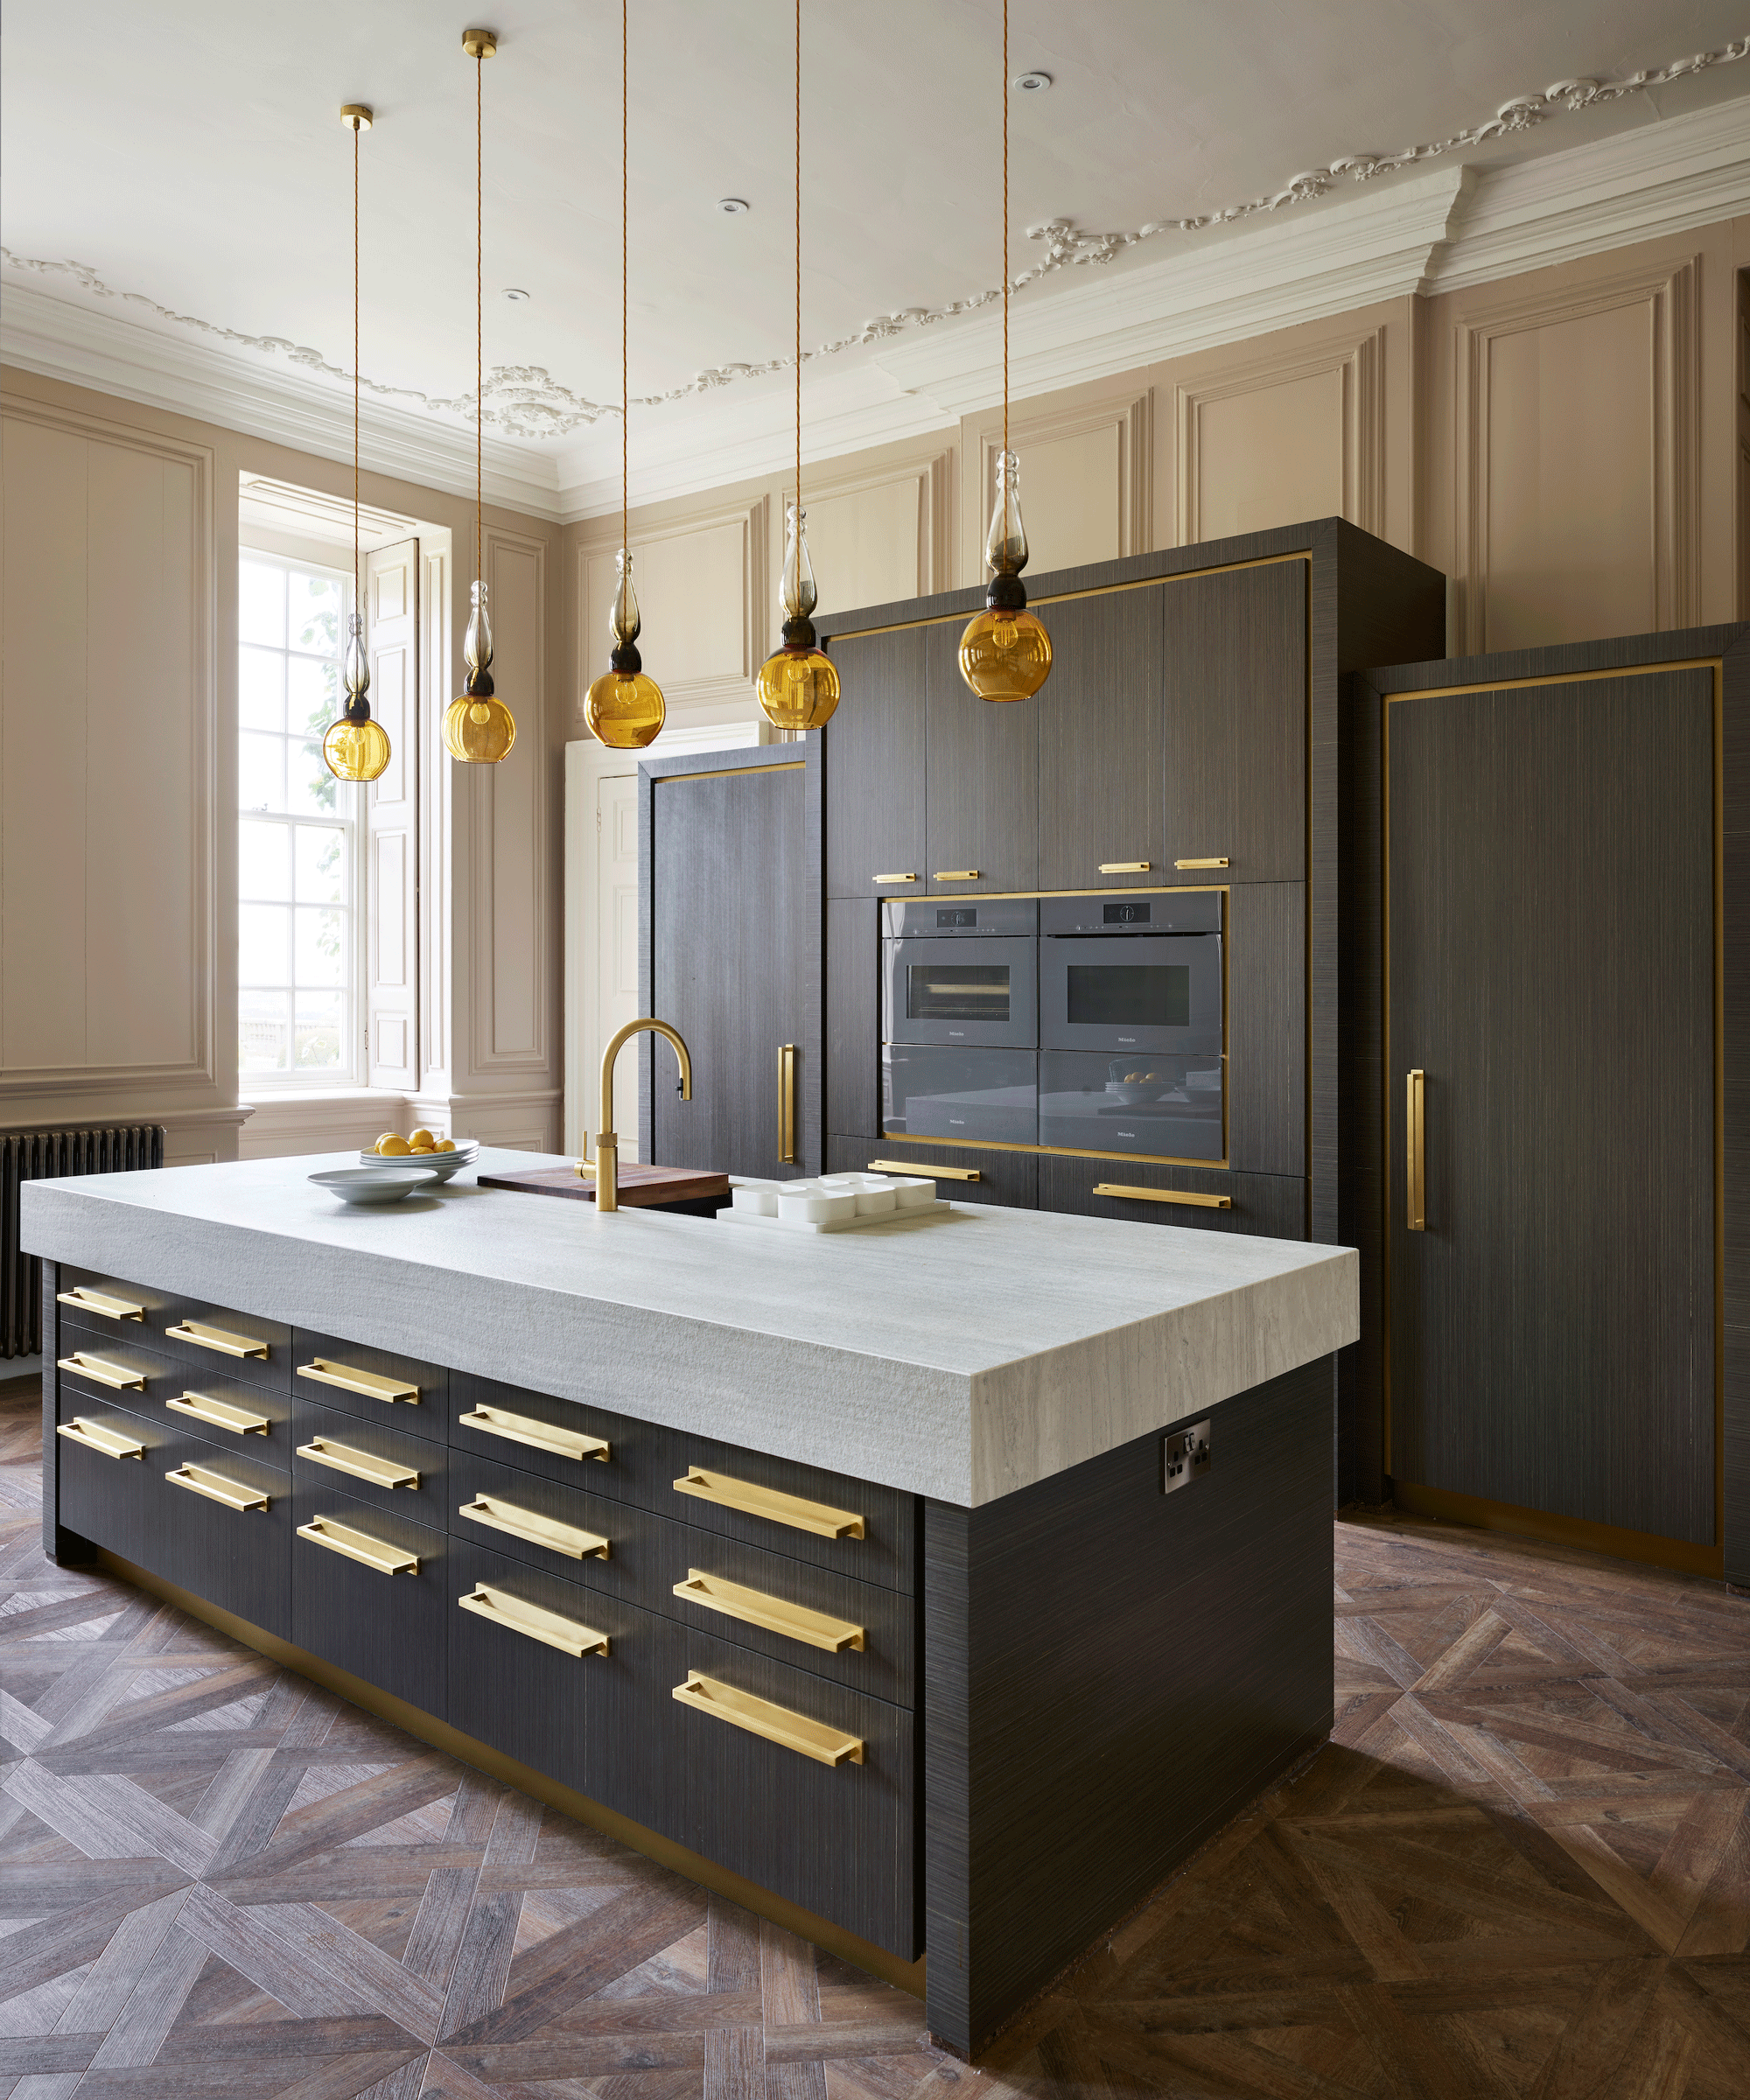 Large kitchen island with a thick stone worktop and gold hardware